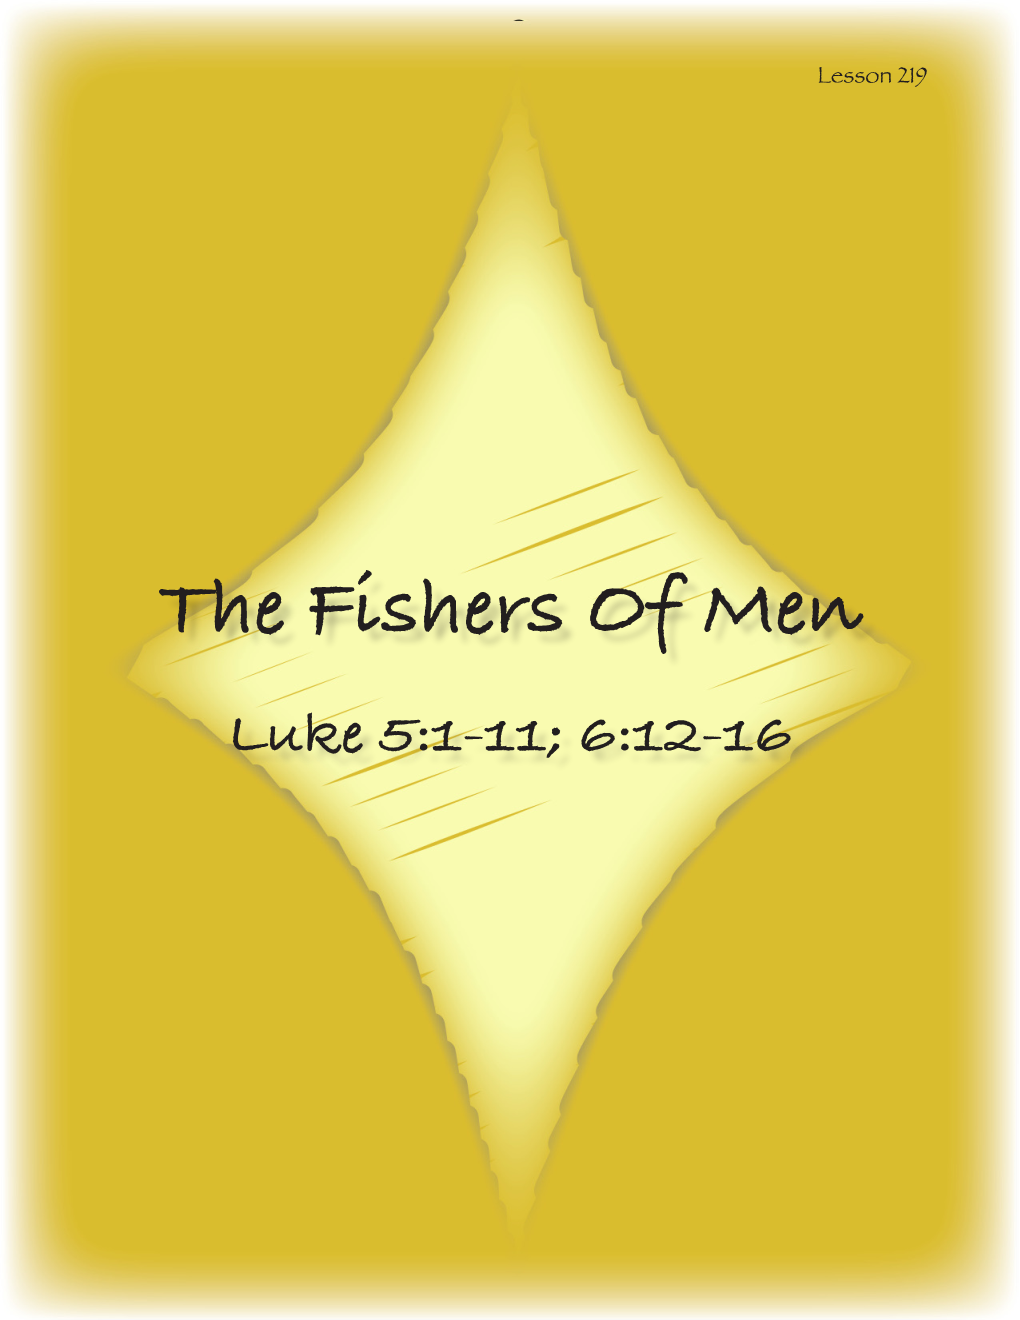 The Fishers Of